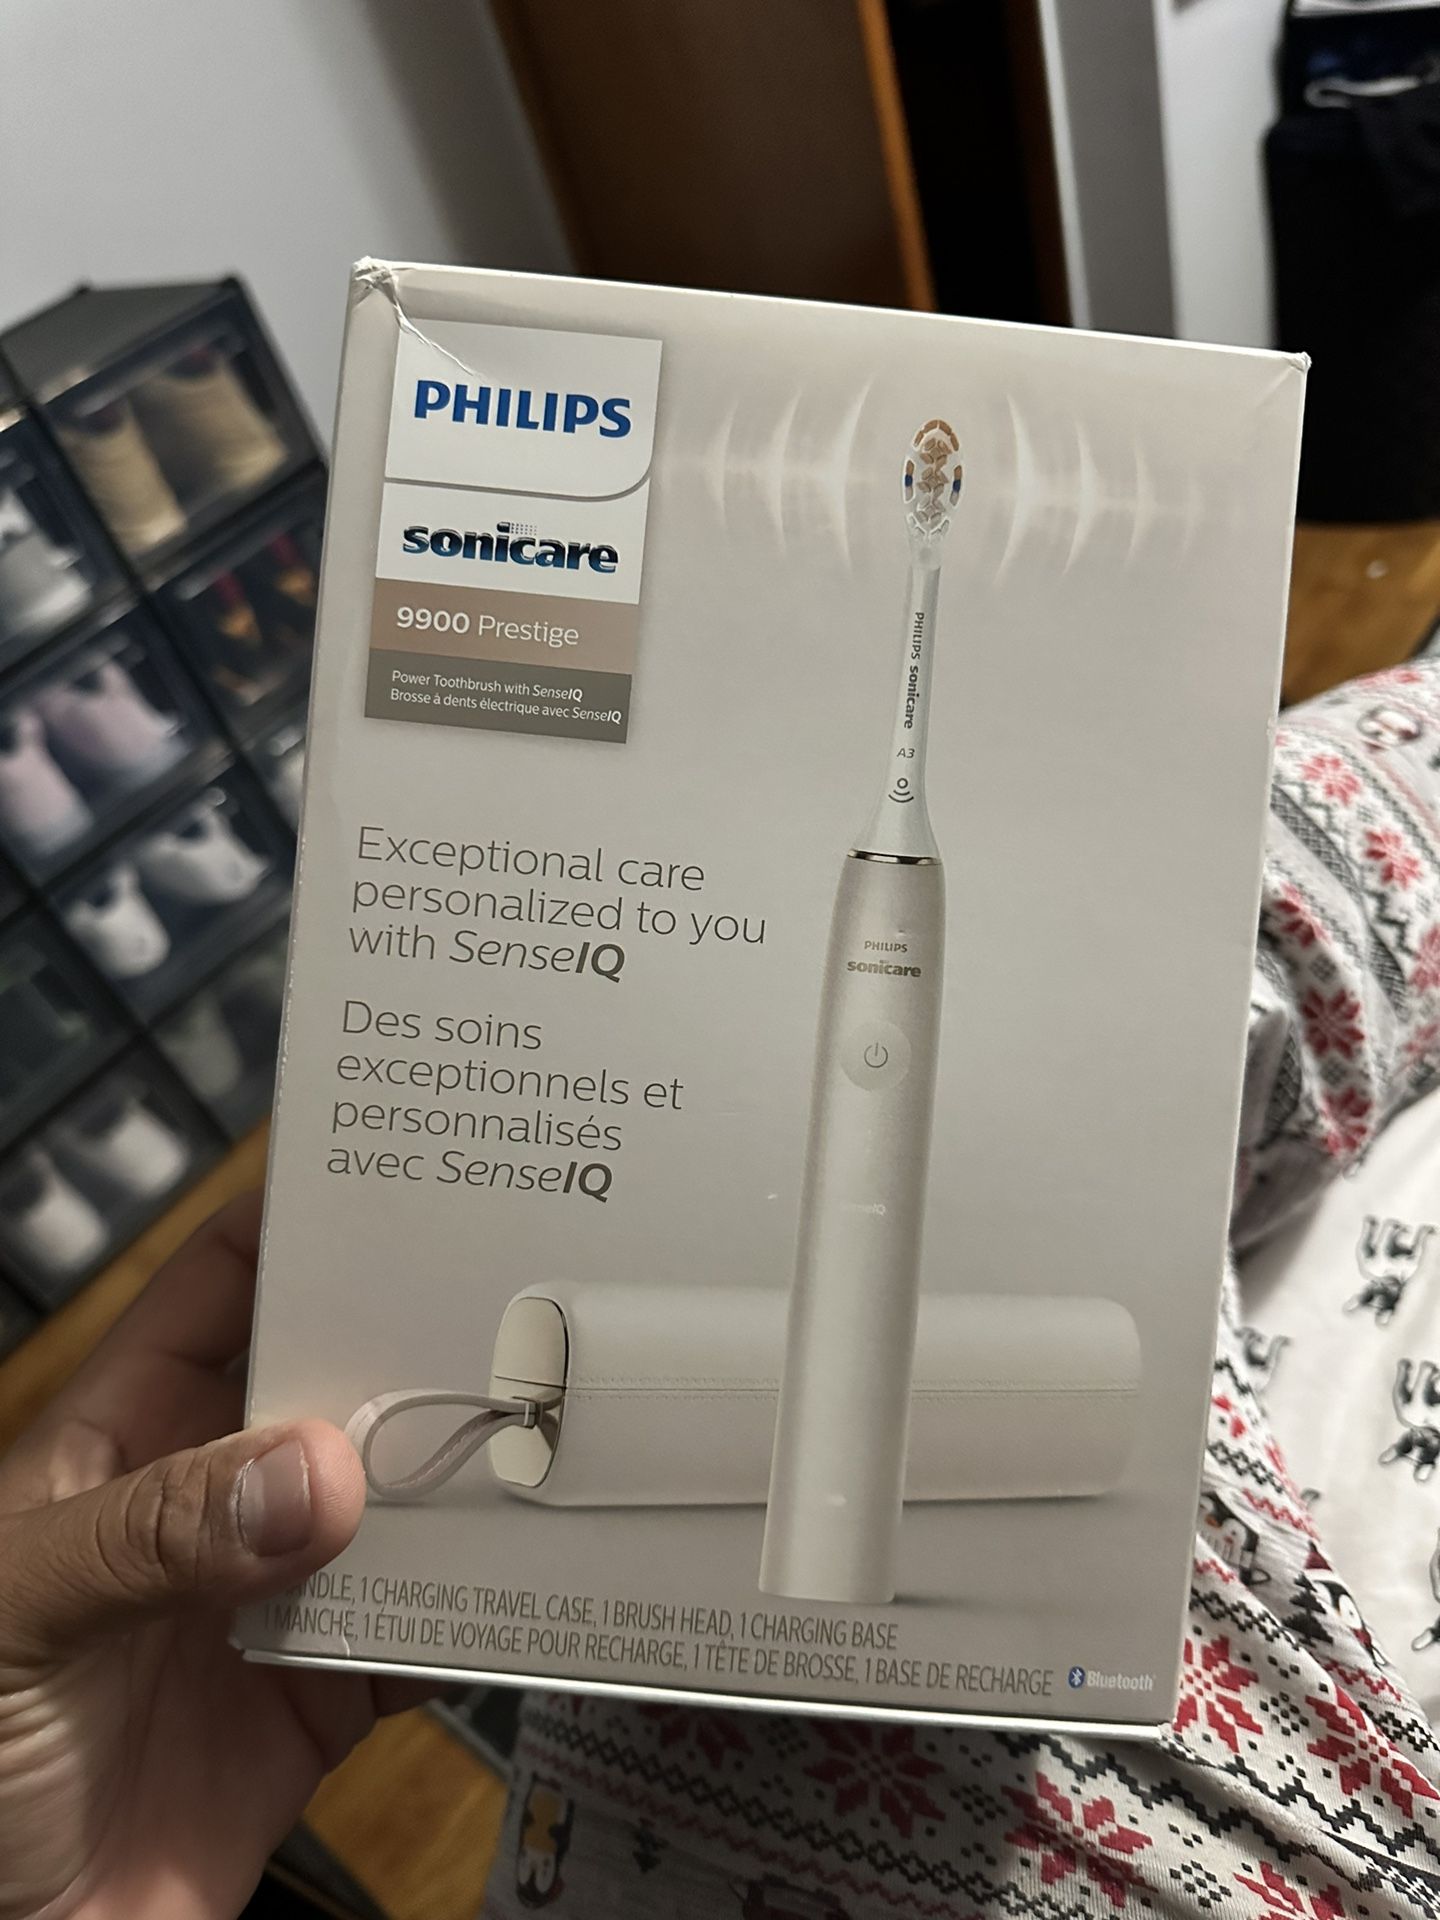 Philips Sonicare 9900 Prestige Rechargeable 